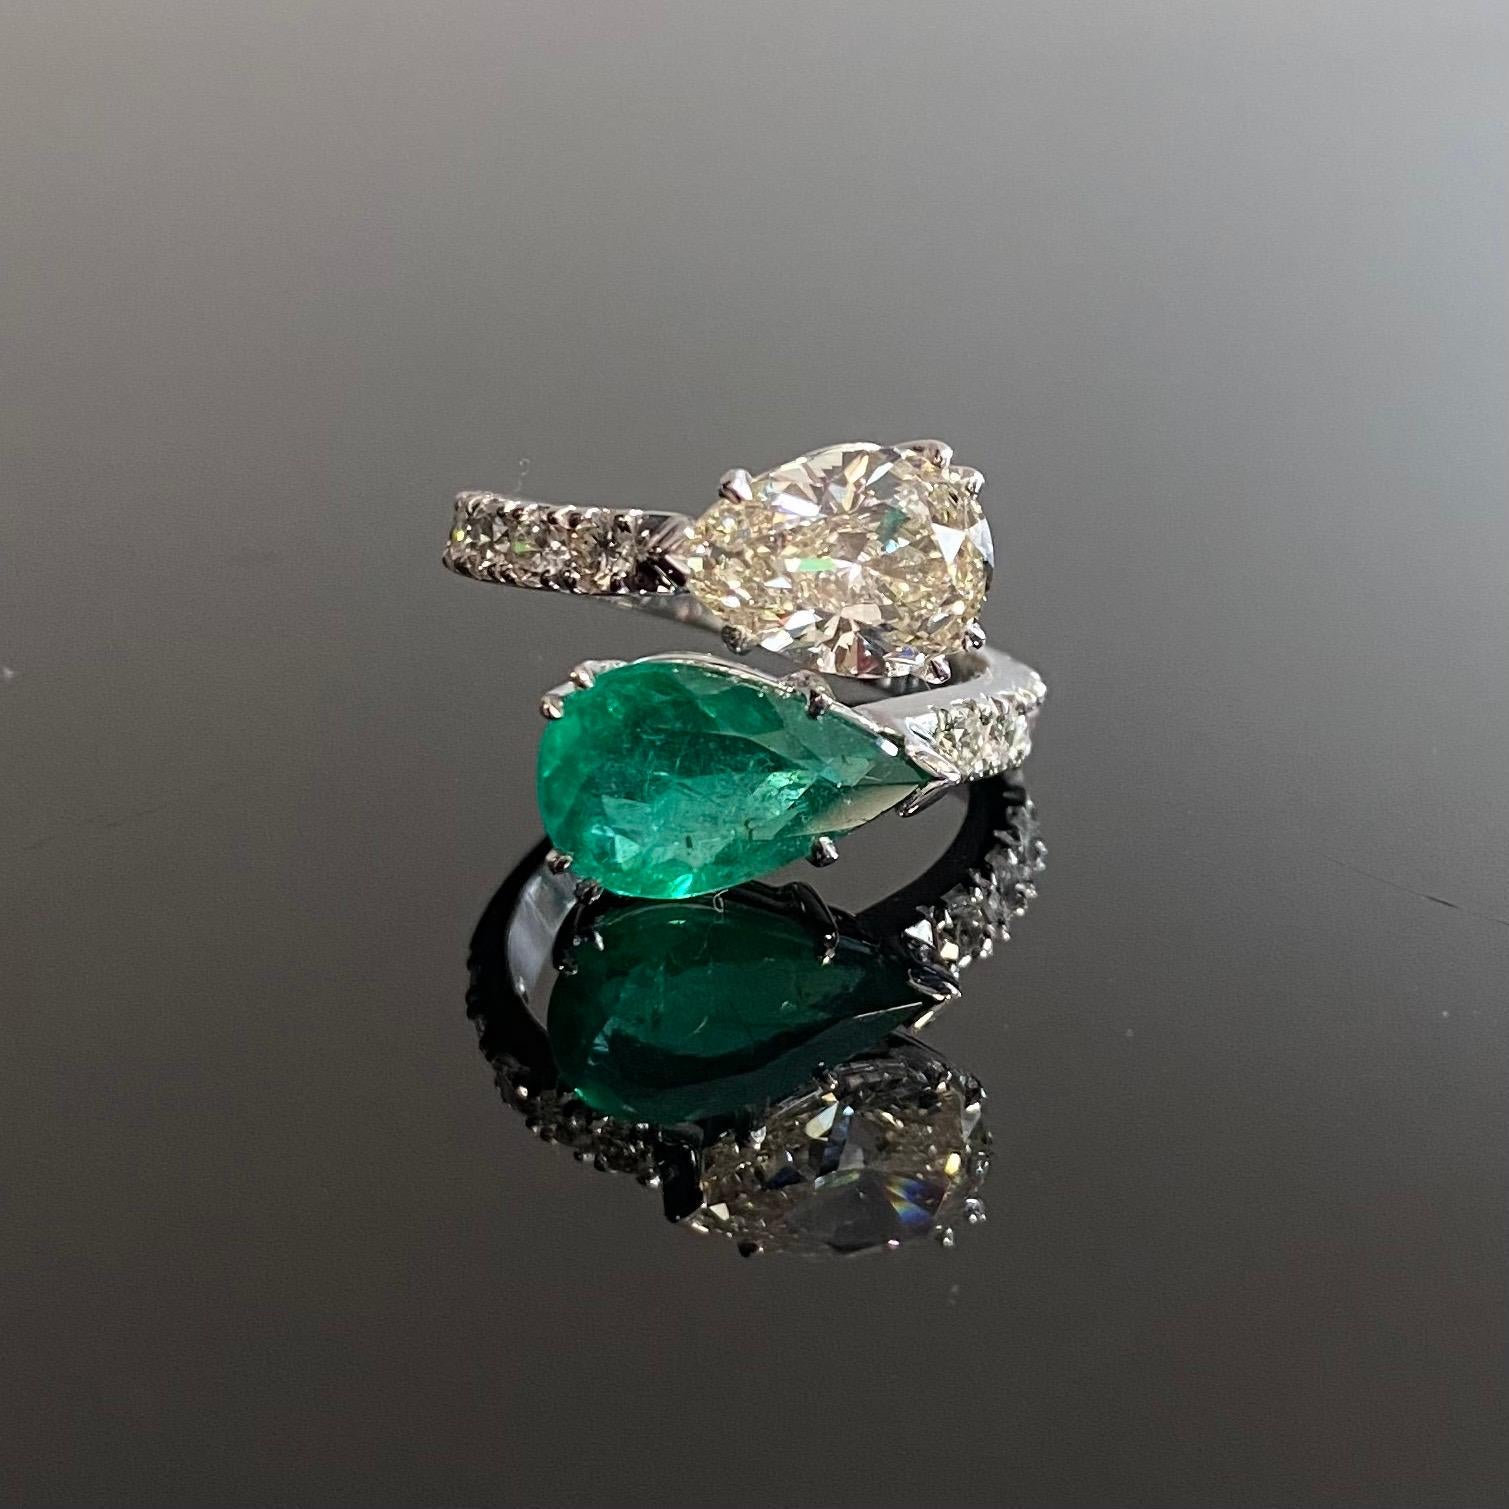 Contemporary Emerald and Diamond Toi-et-Moi Crossover Engagement Ring in 19.2kt White Gold, Portugal, 2000s. This jewel features a pear-shape emerald of a deep green color and a sparkly pear brilliant-cut diamond both talon-claw-set in open-back